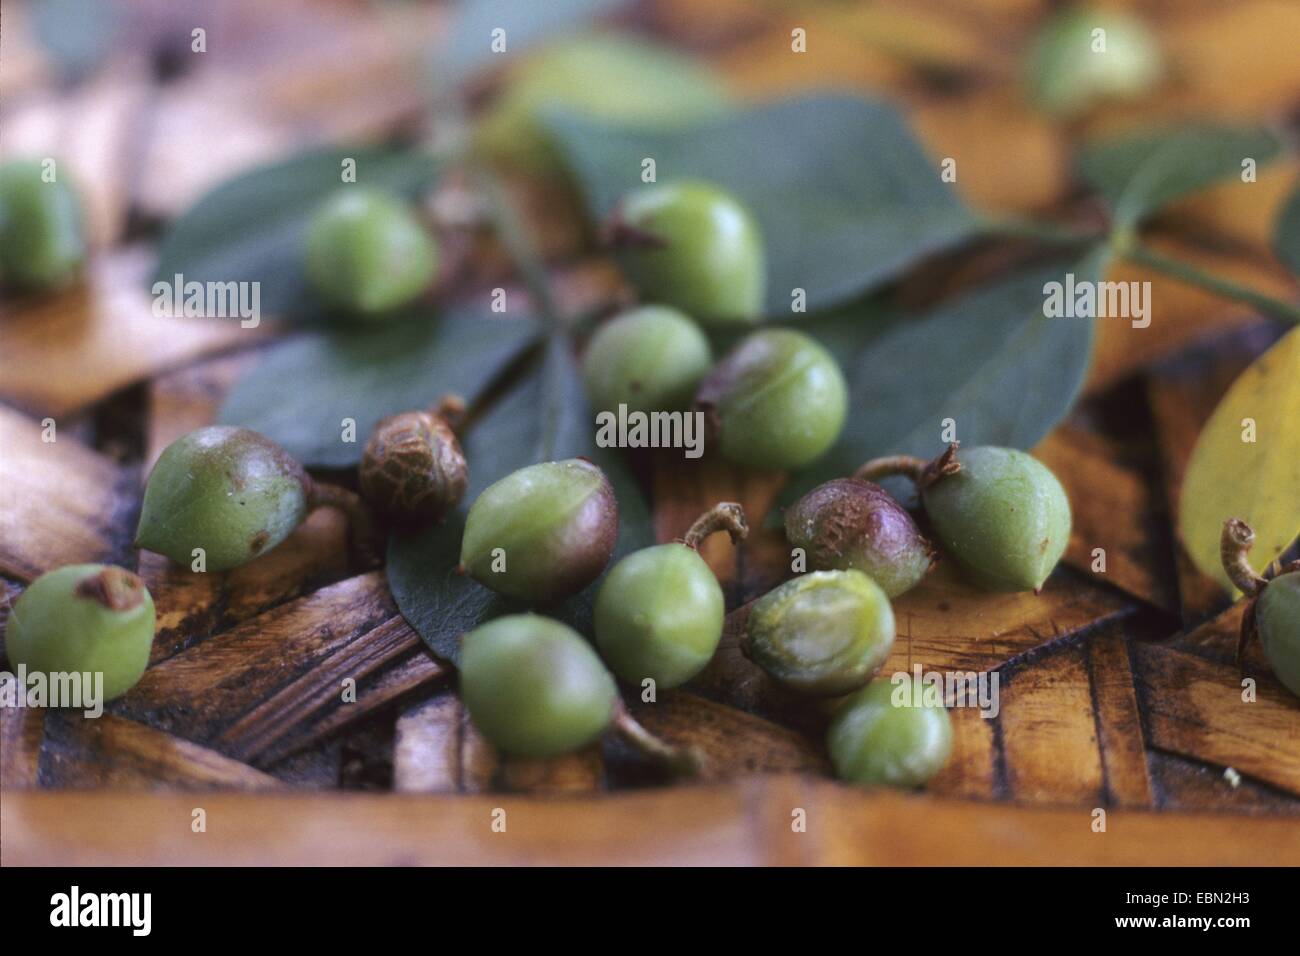 Balsam of gilead (Commiphora abyssinica), fruits Stock Photo